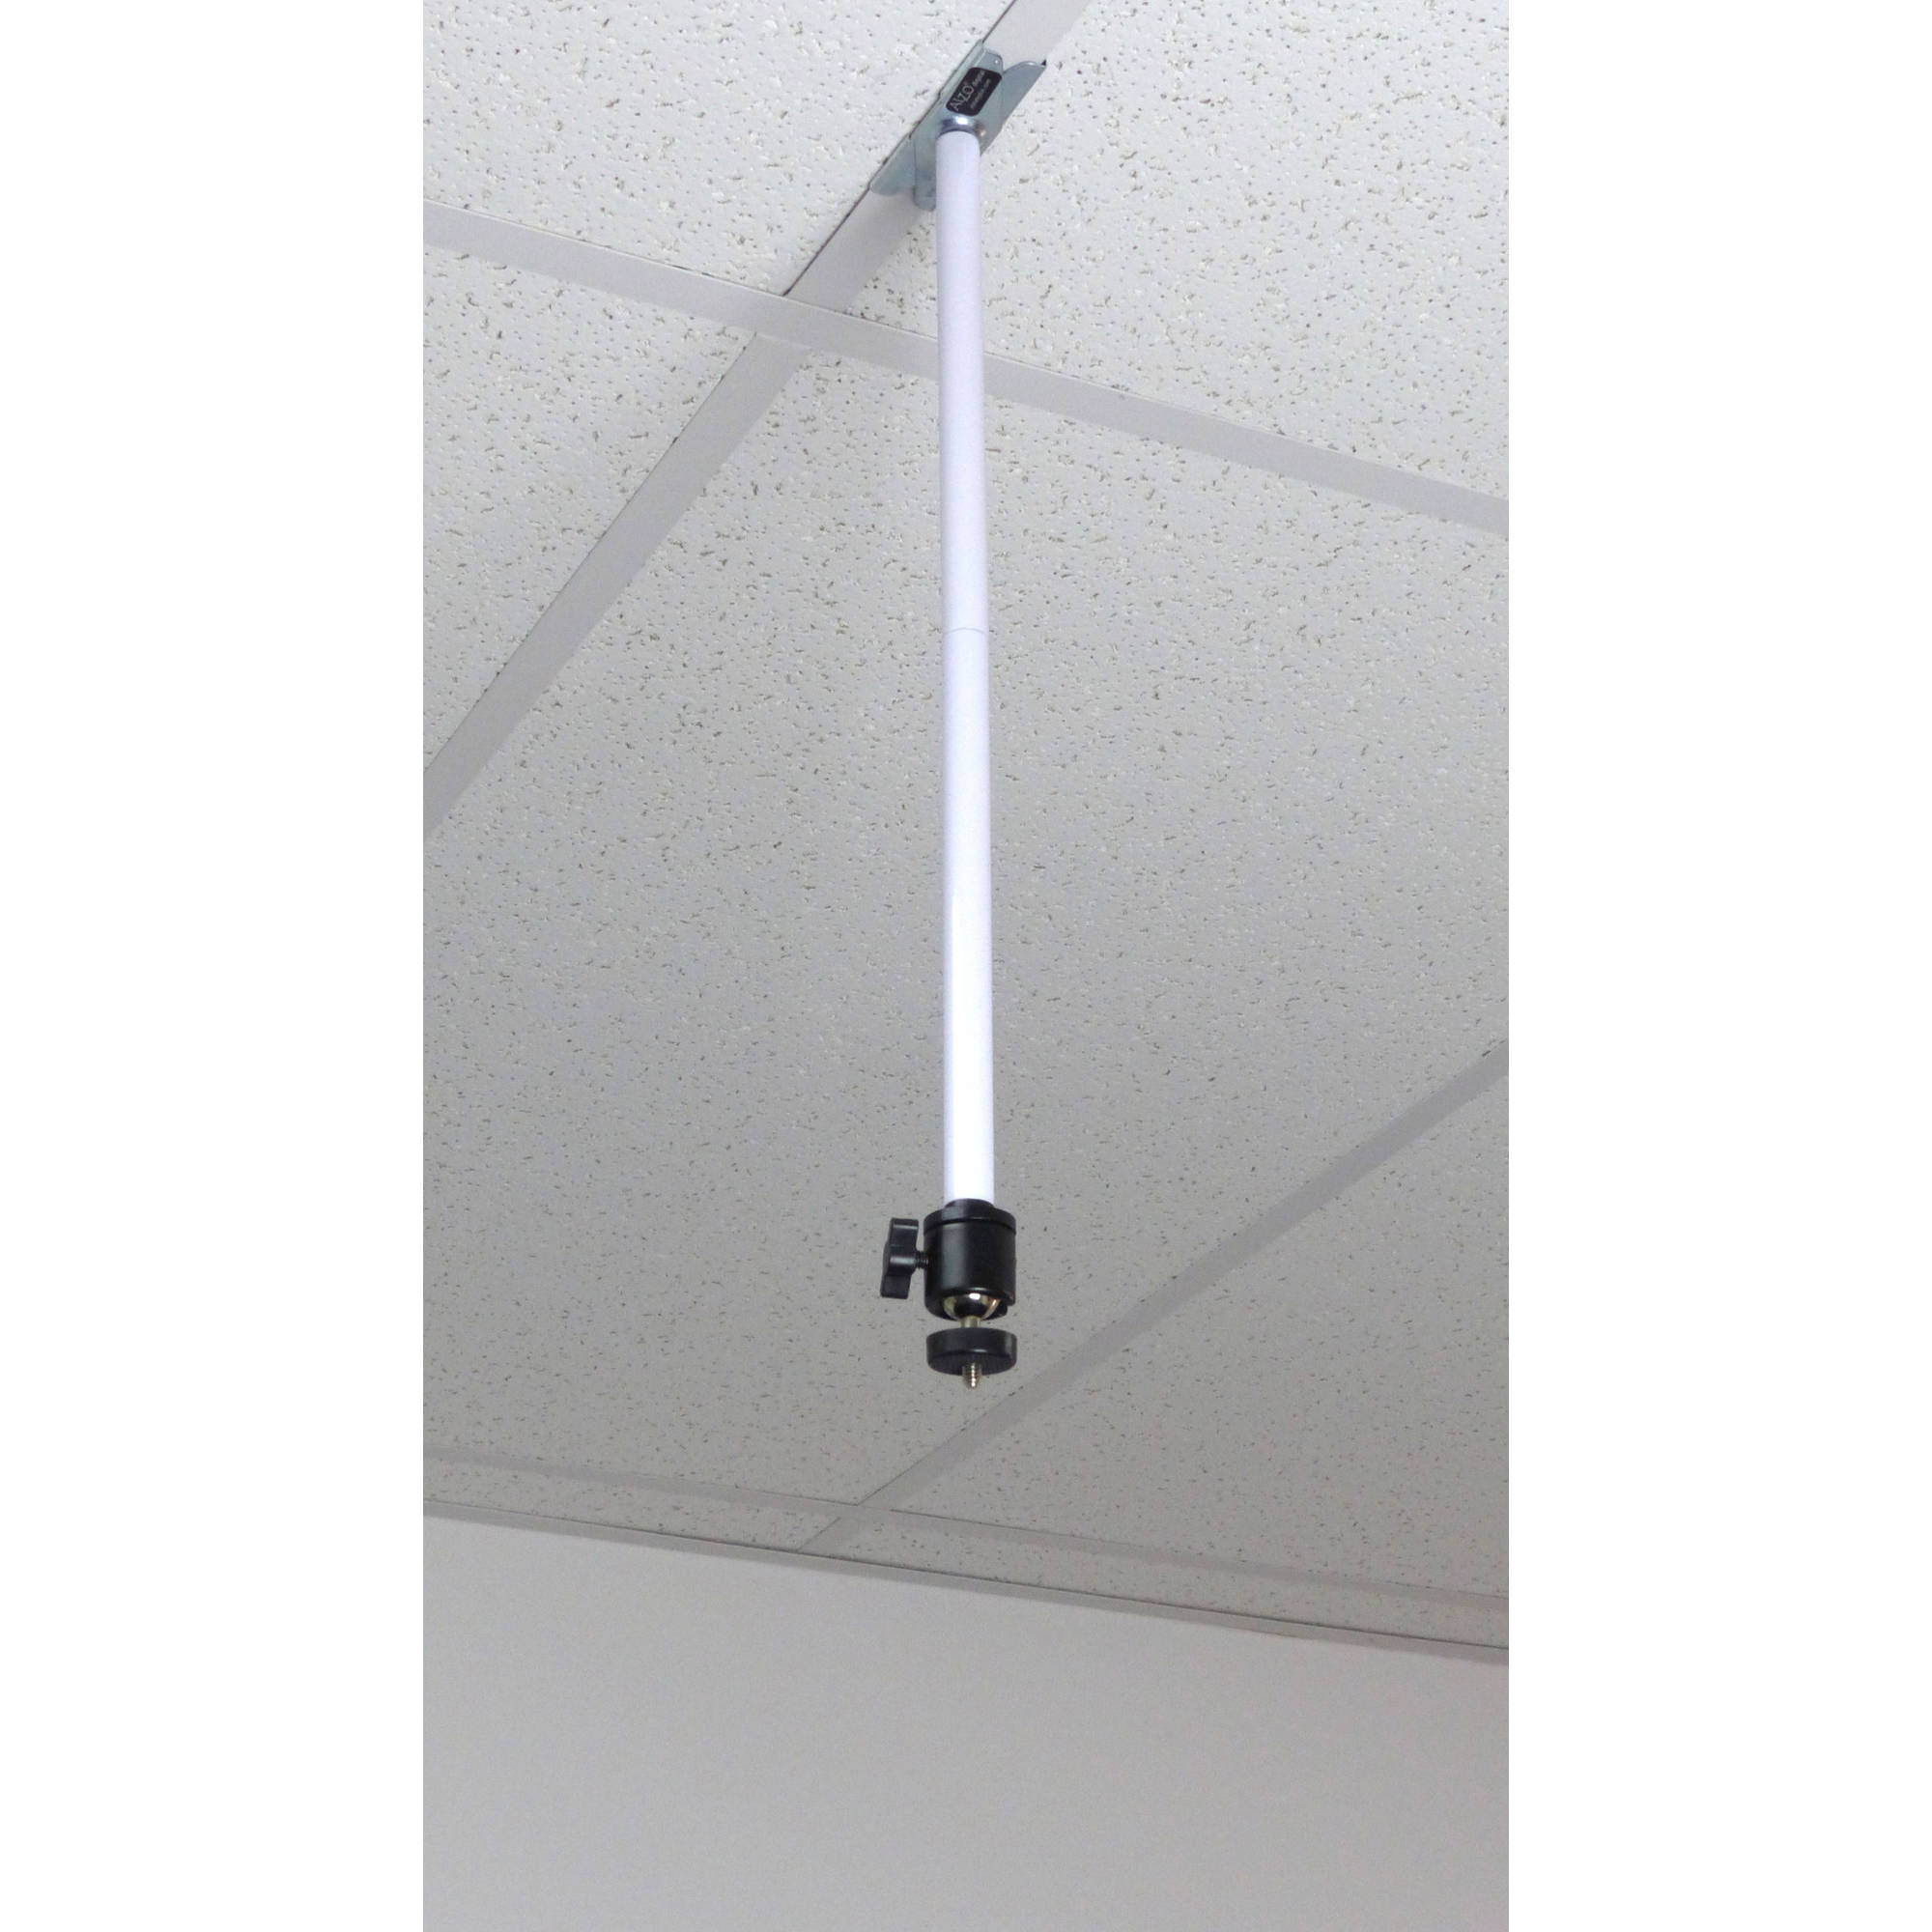 Alzo Suspended Drop Ceiling Mount For Pico Video Projector 1238